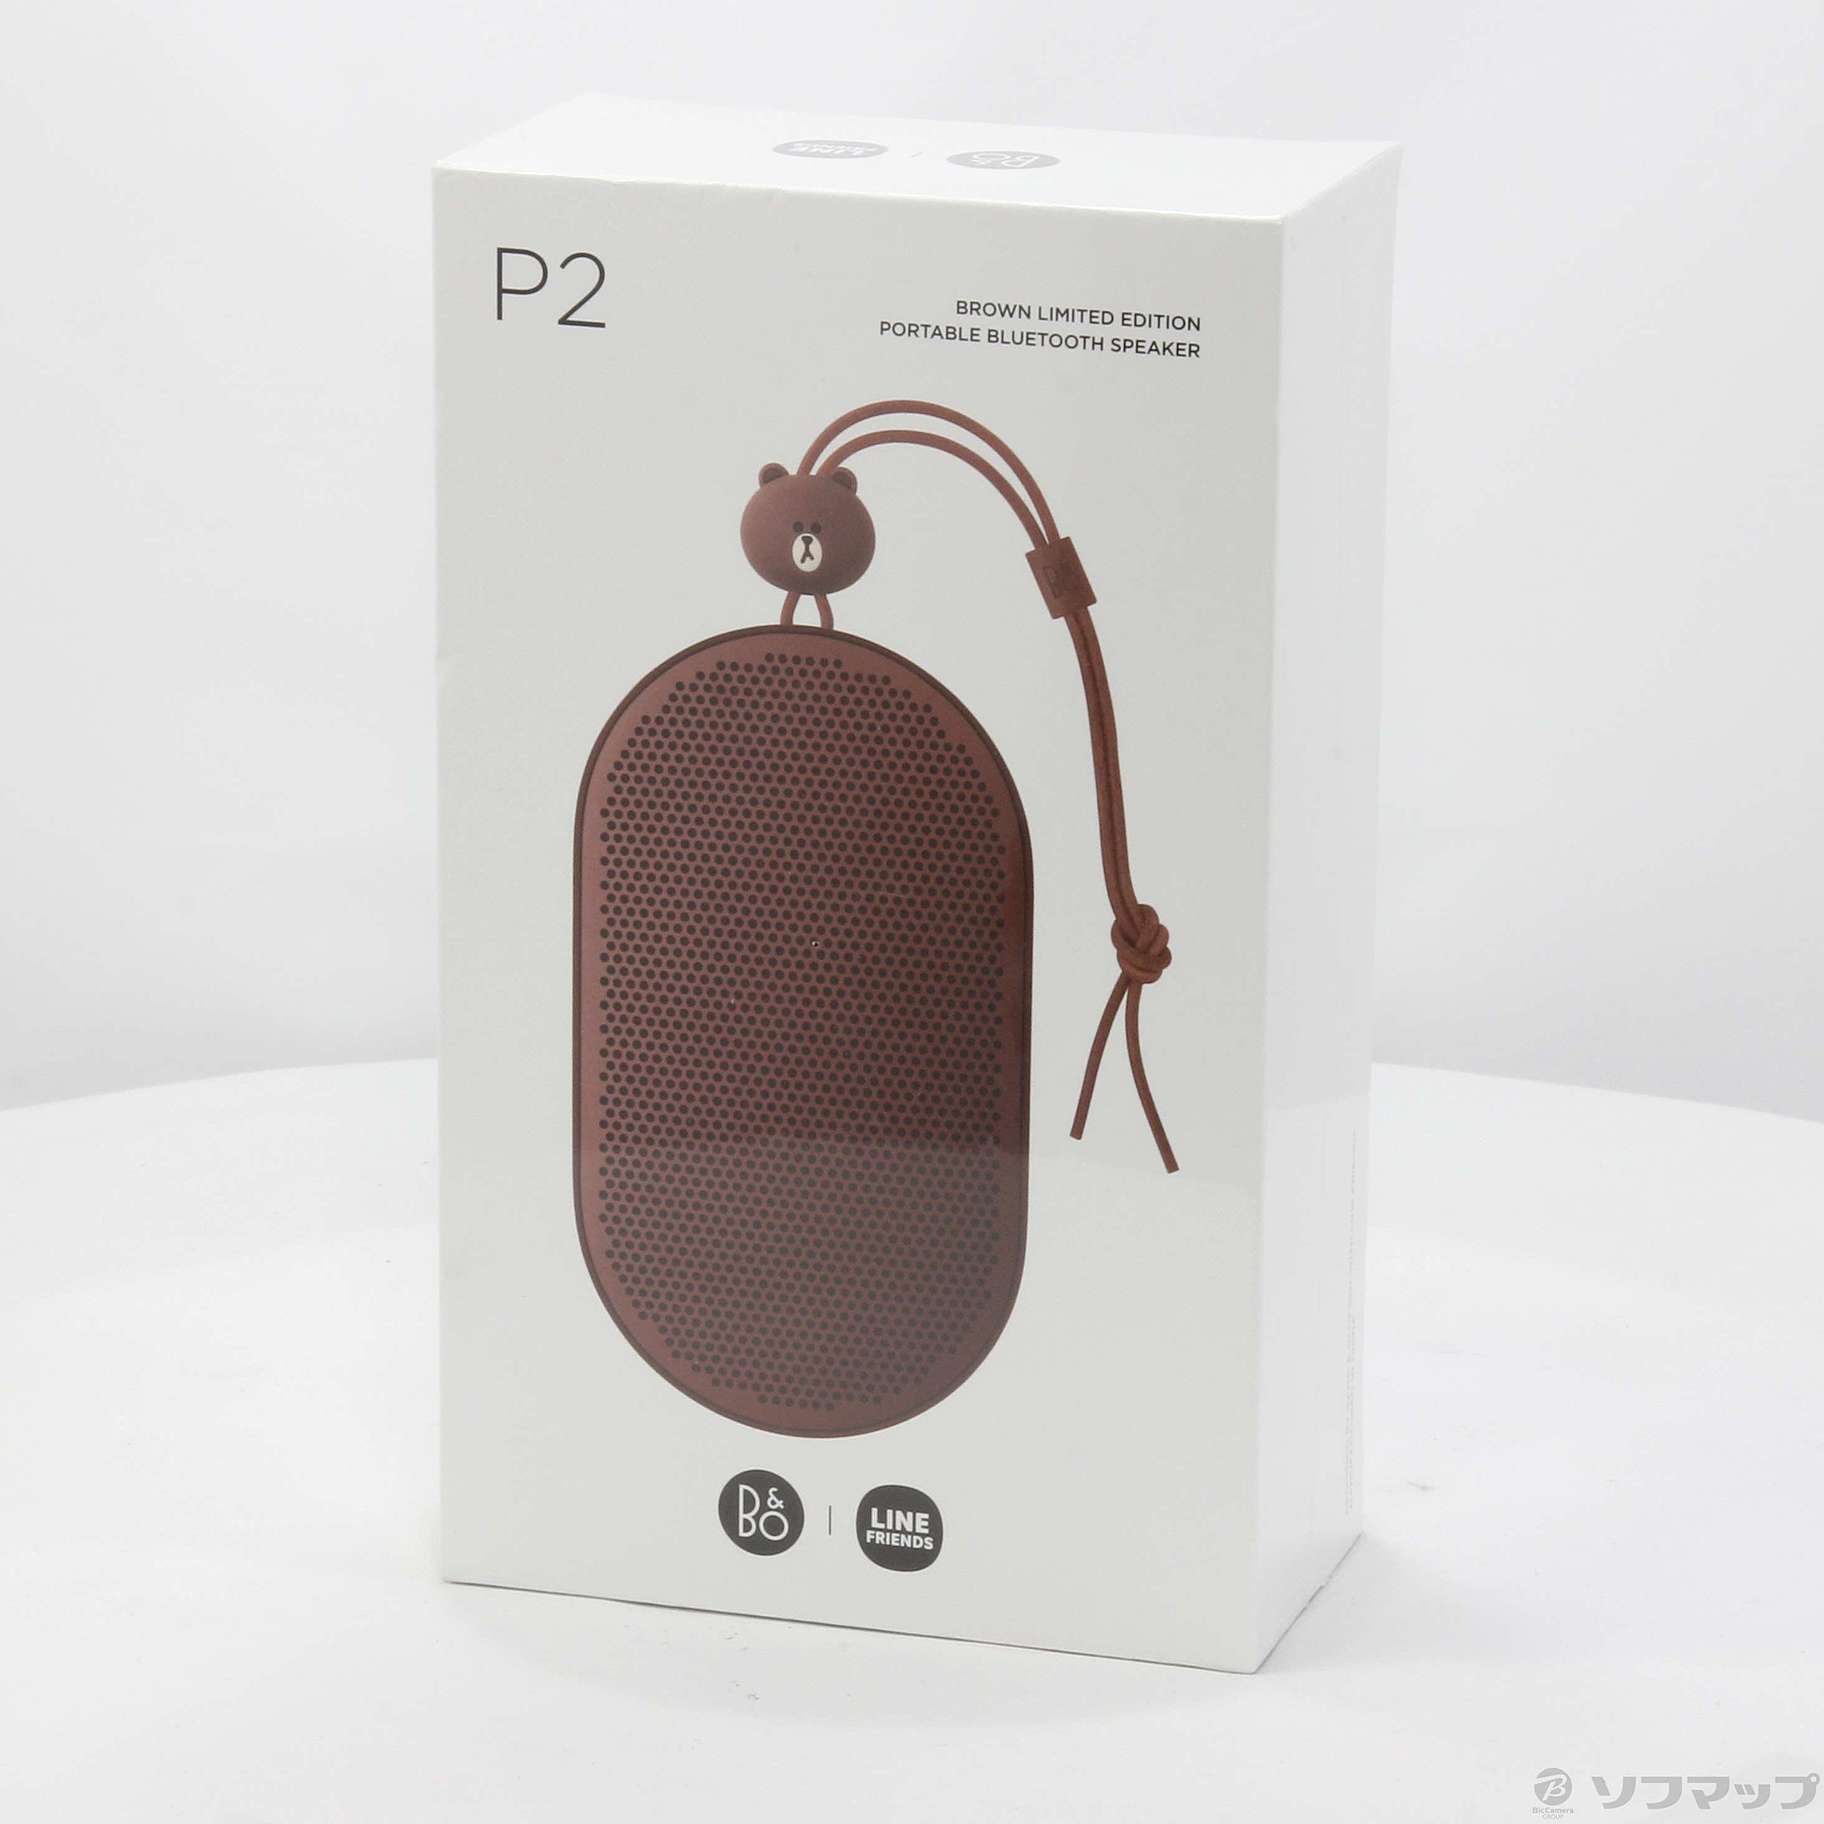 Beoplay P2 BROWN Limited Edtion